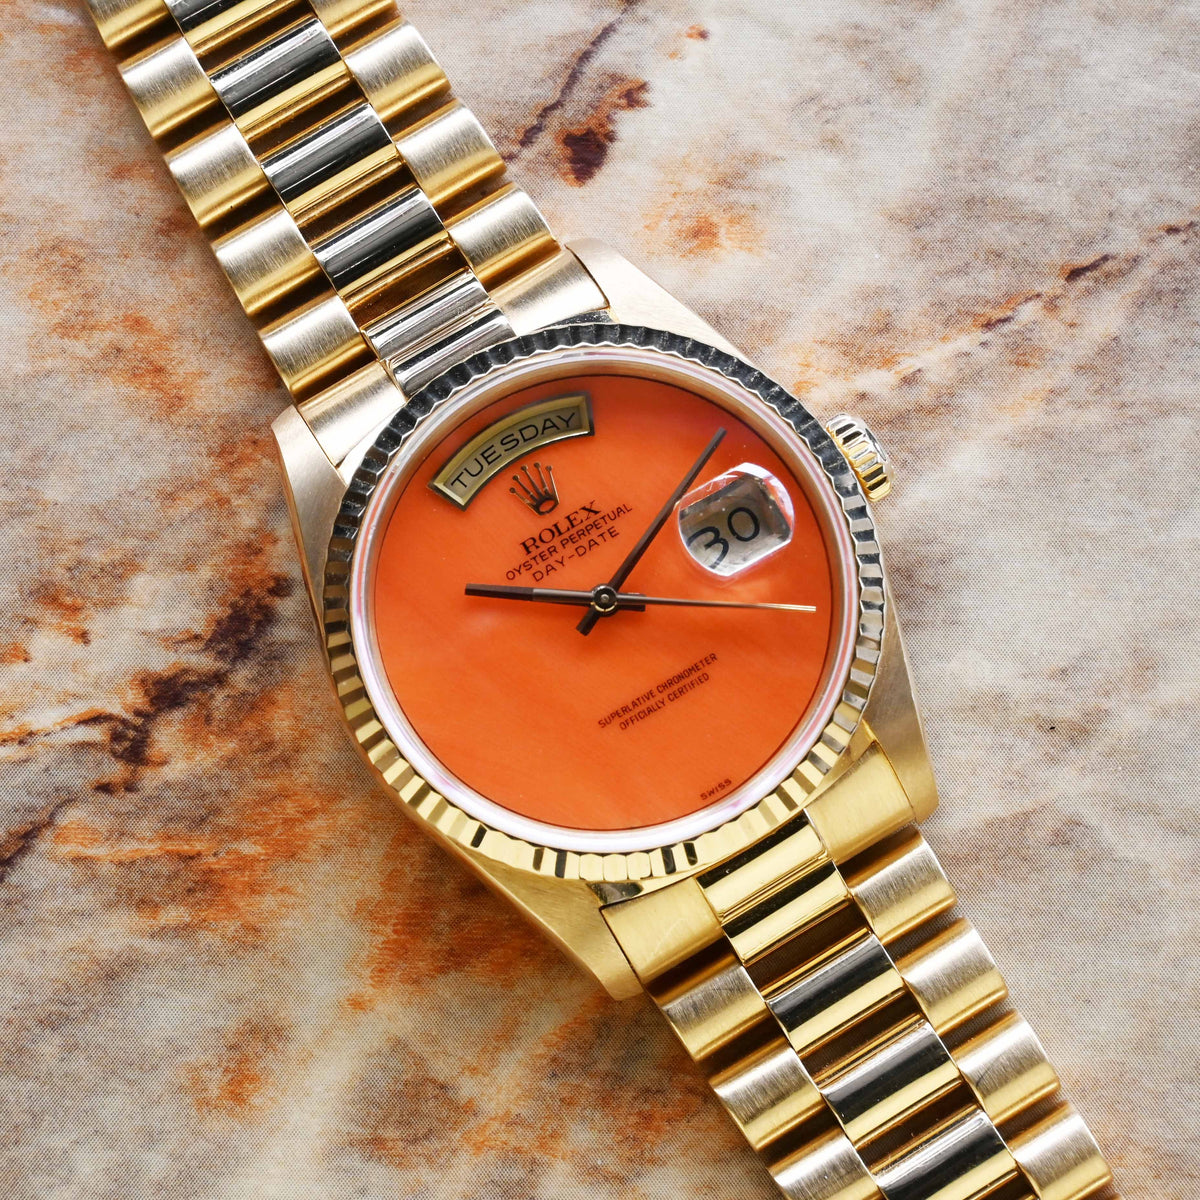 1989 Rolex Day Date Coral Dial Ref. 18238